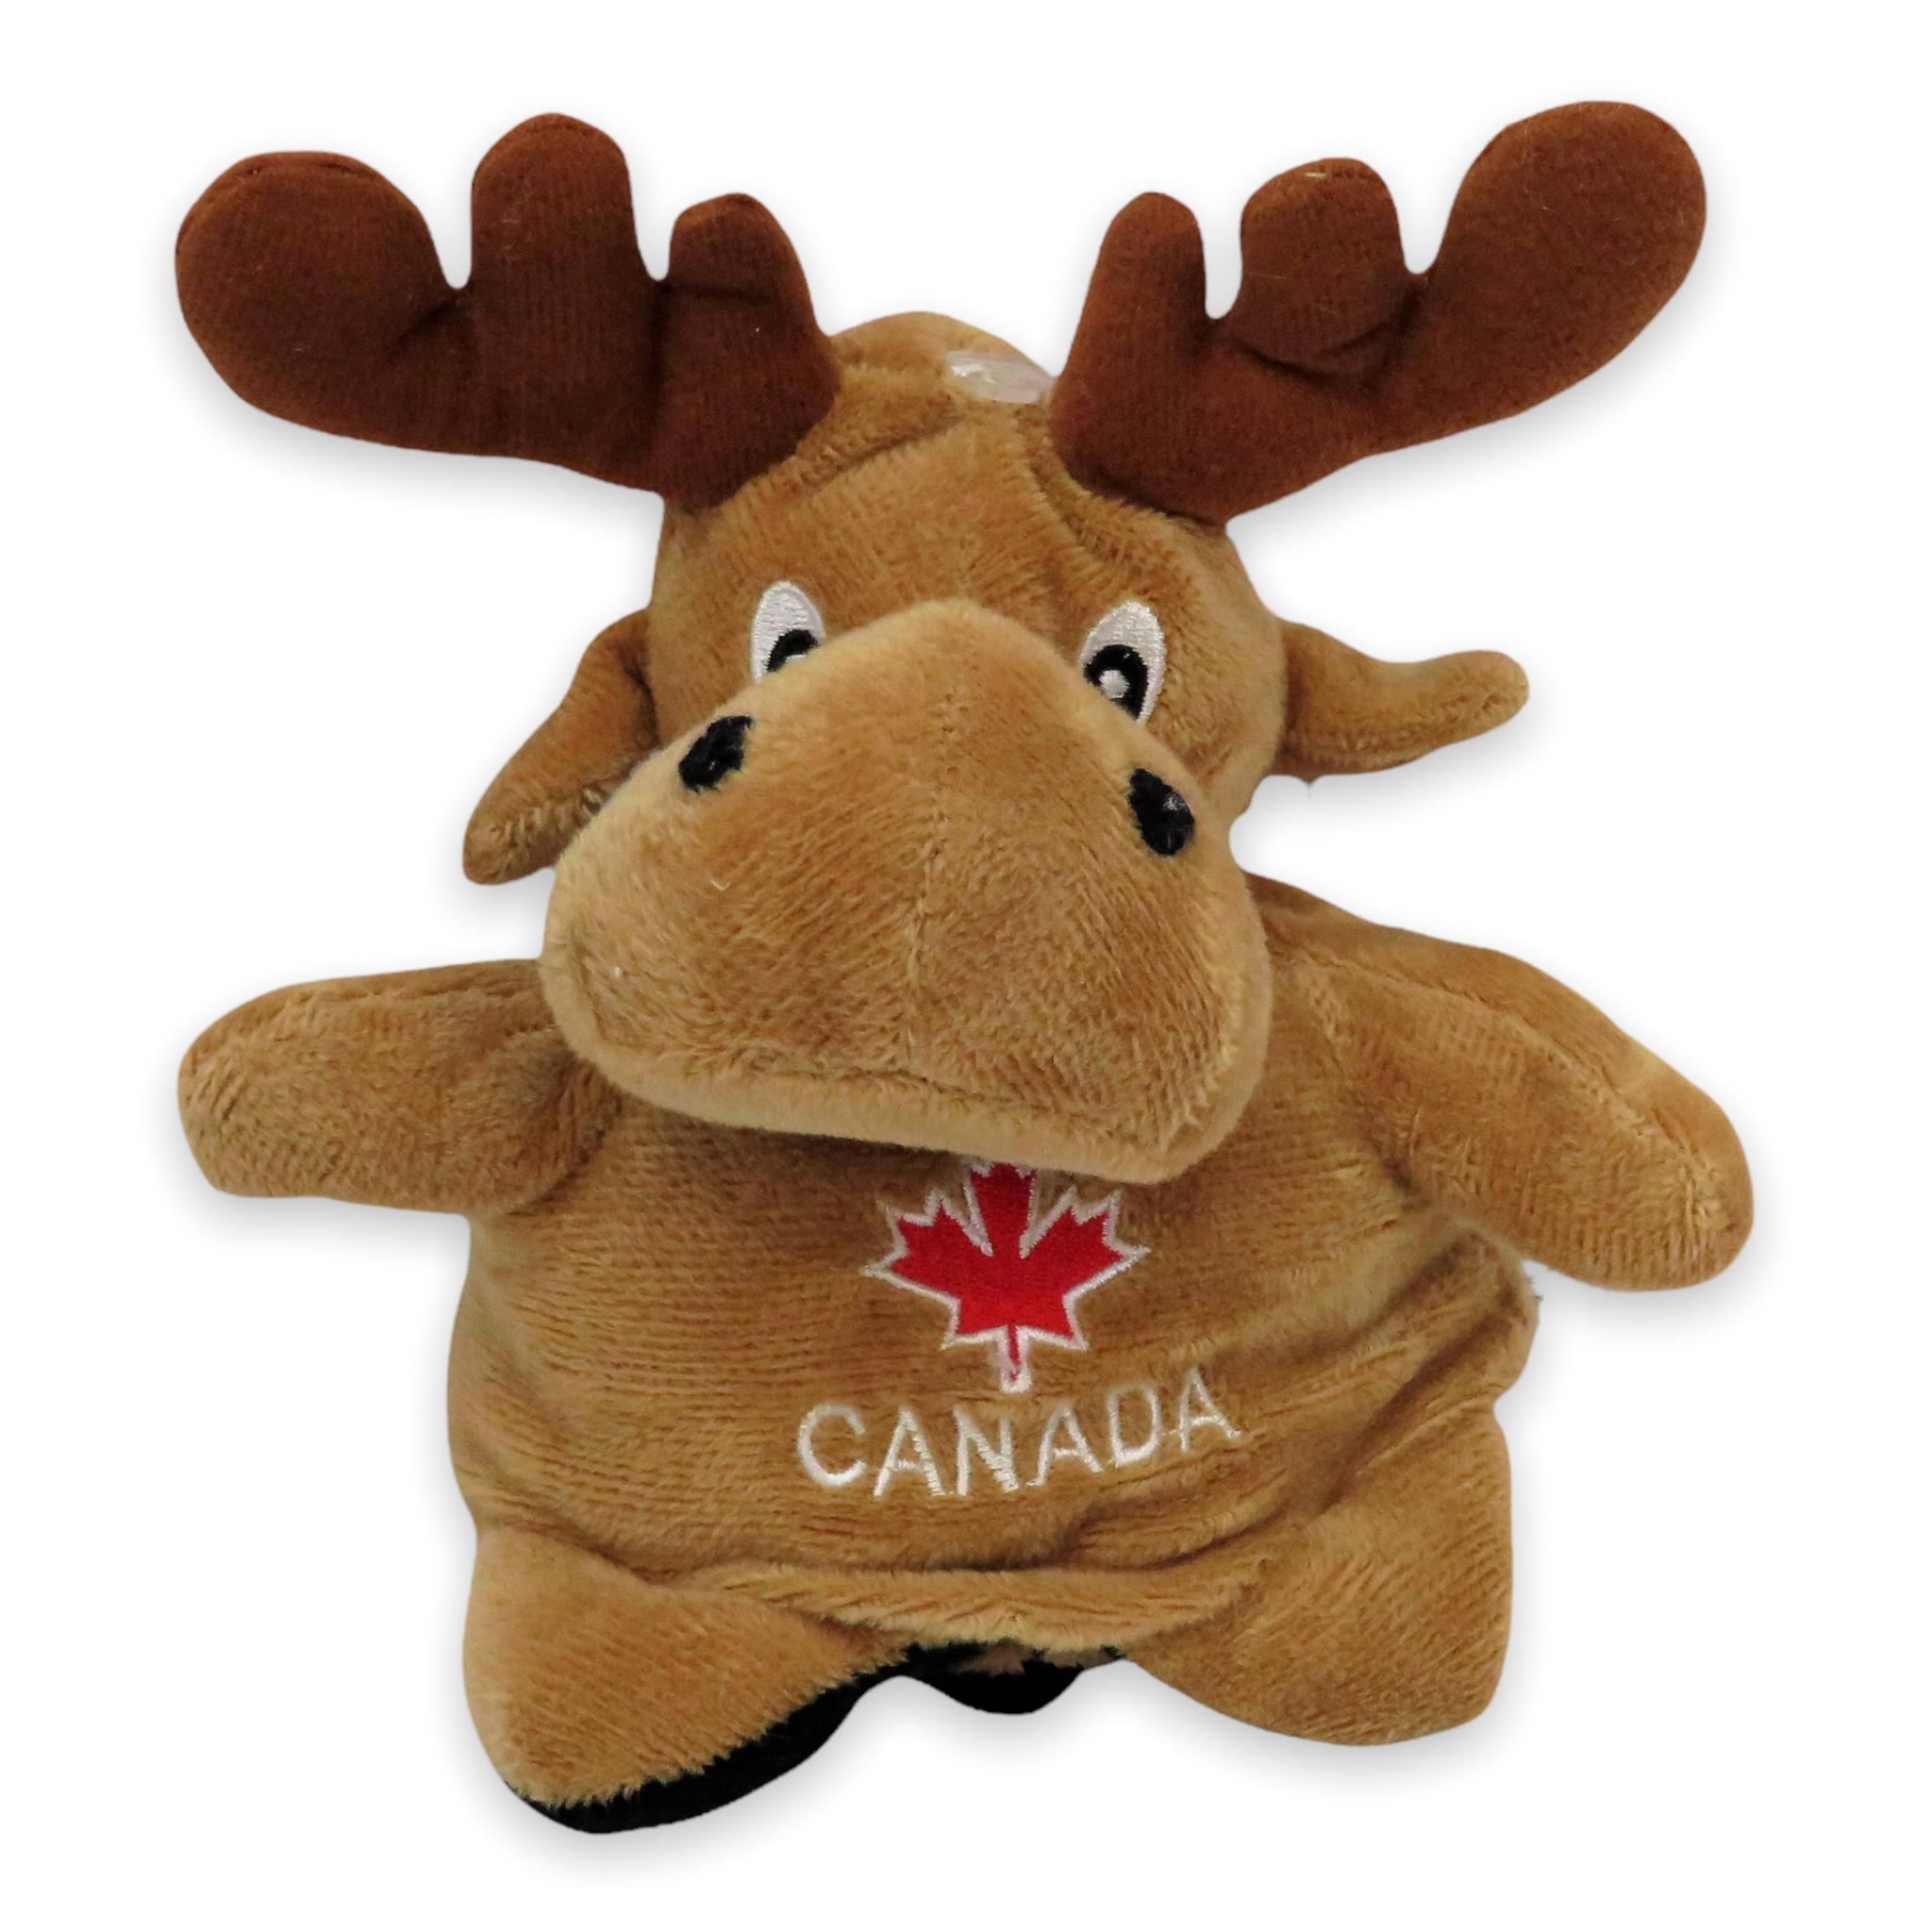 Stuffed Animal Moose and Beaver or Bear - 2 in 1 Canadian Plush Toy